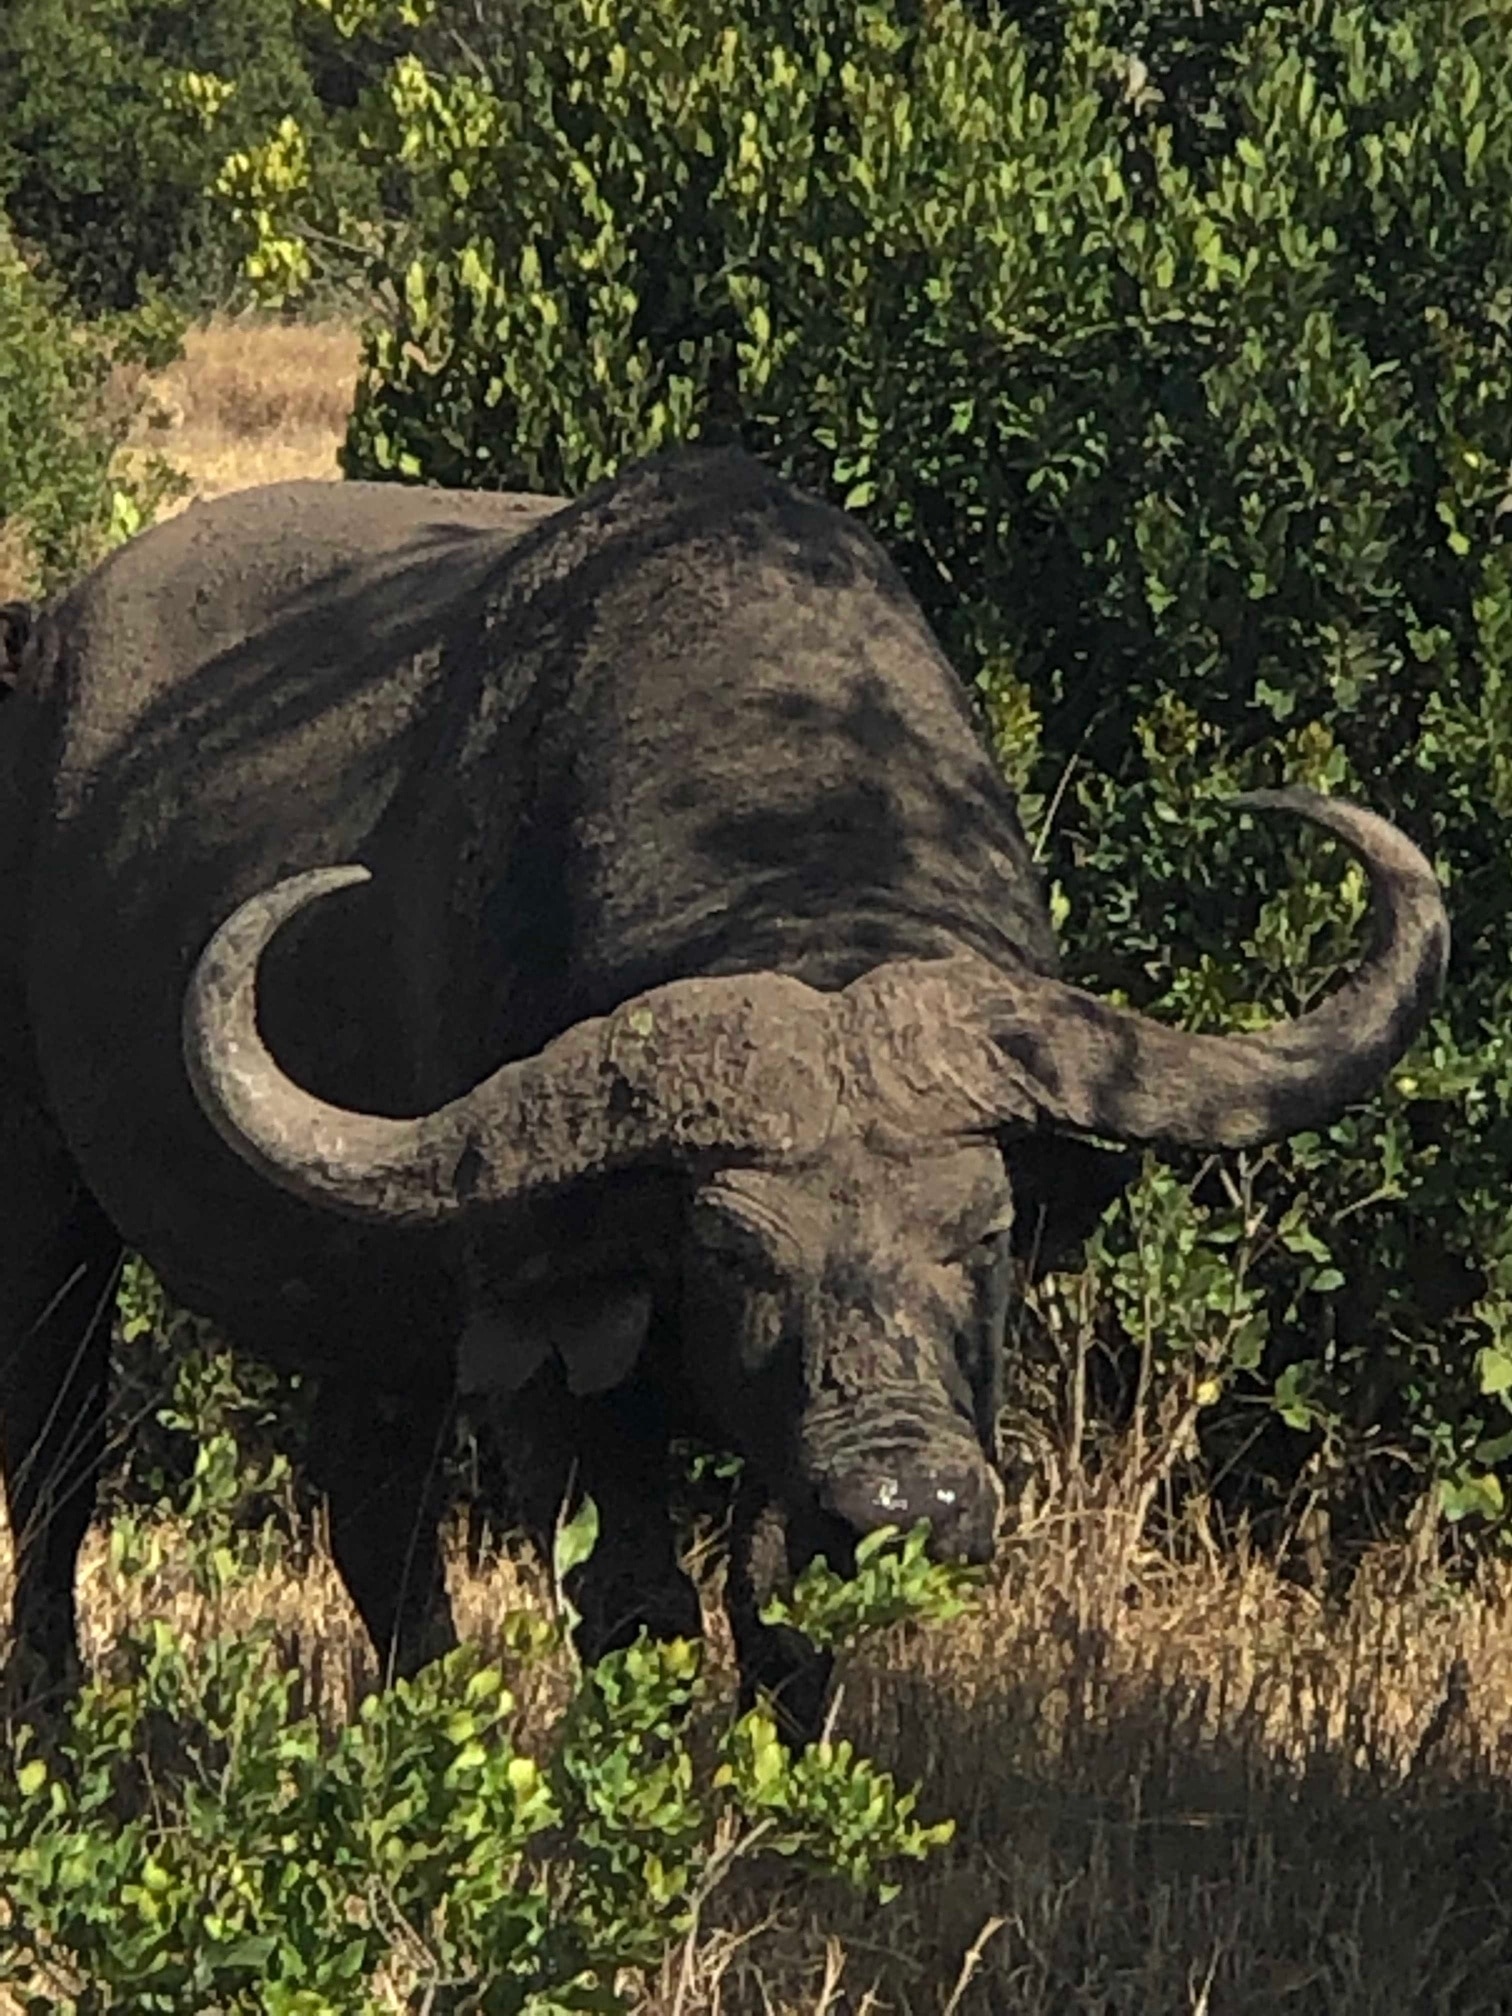 #OnTheRoad
I captured this beautiful male Bull grazing on grass 😂😍